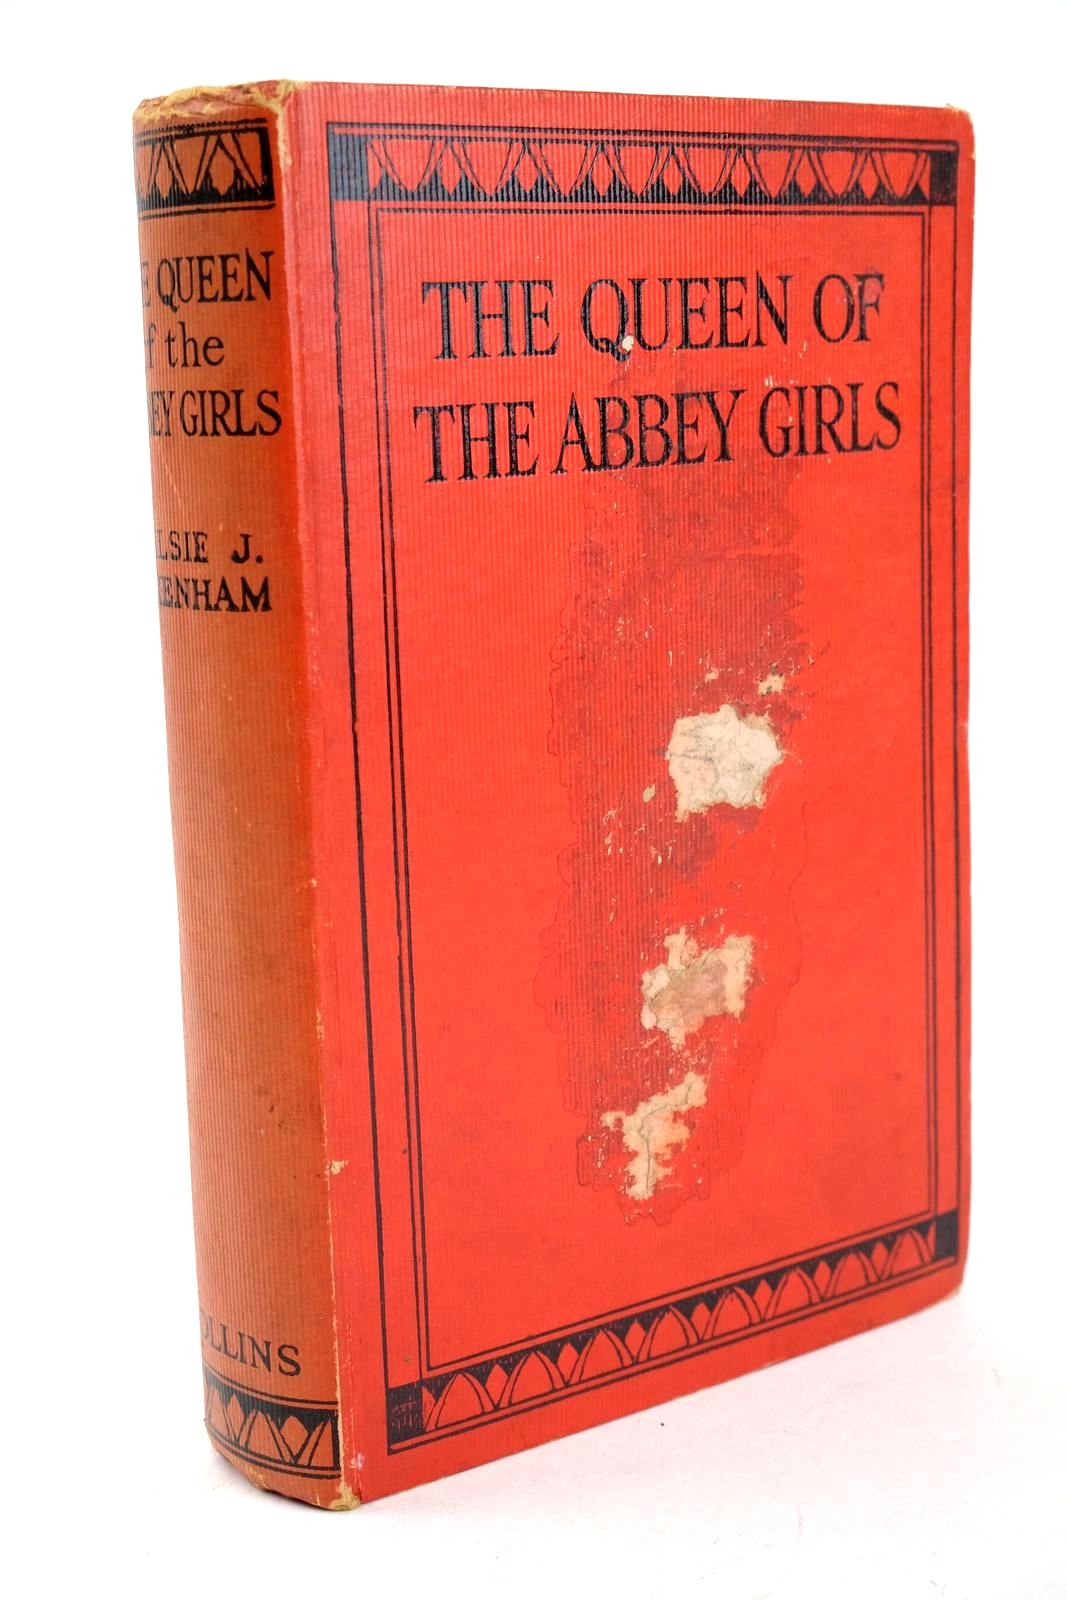 Photo of QUEEN OF THE ABBEY GIRLS written by Oxenham, Elsie J. published by Collins Clear-Type Press (STOCK CODE: 1327048)  for sale by Stella & Rose's Books